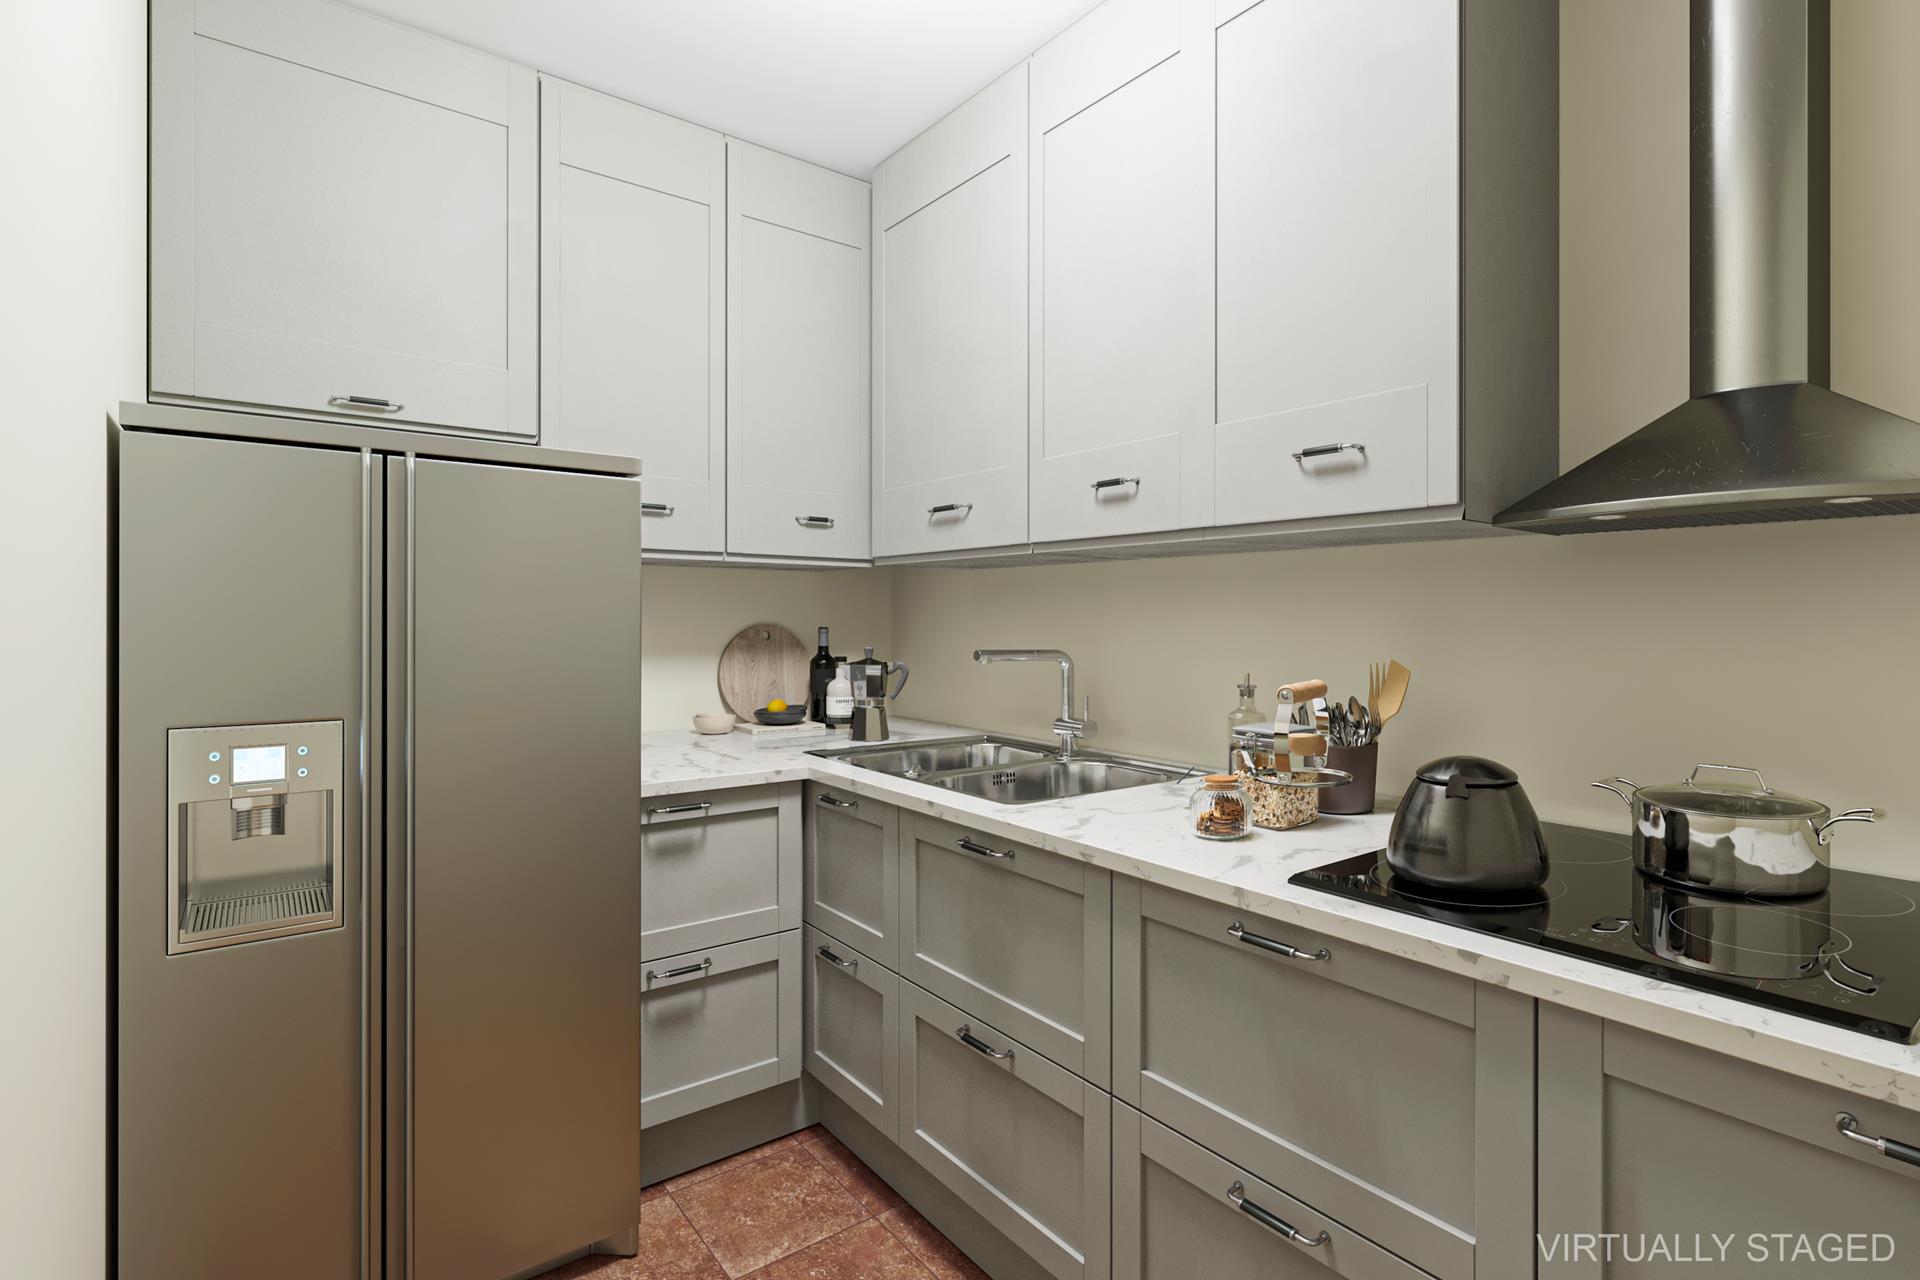 a kitchen with stainless steel appliances white cabinets and a refrigerator